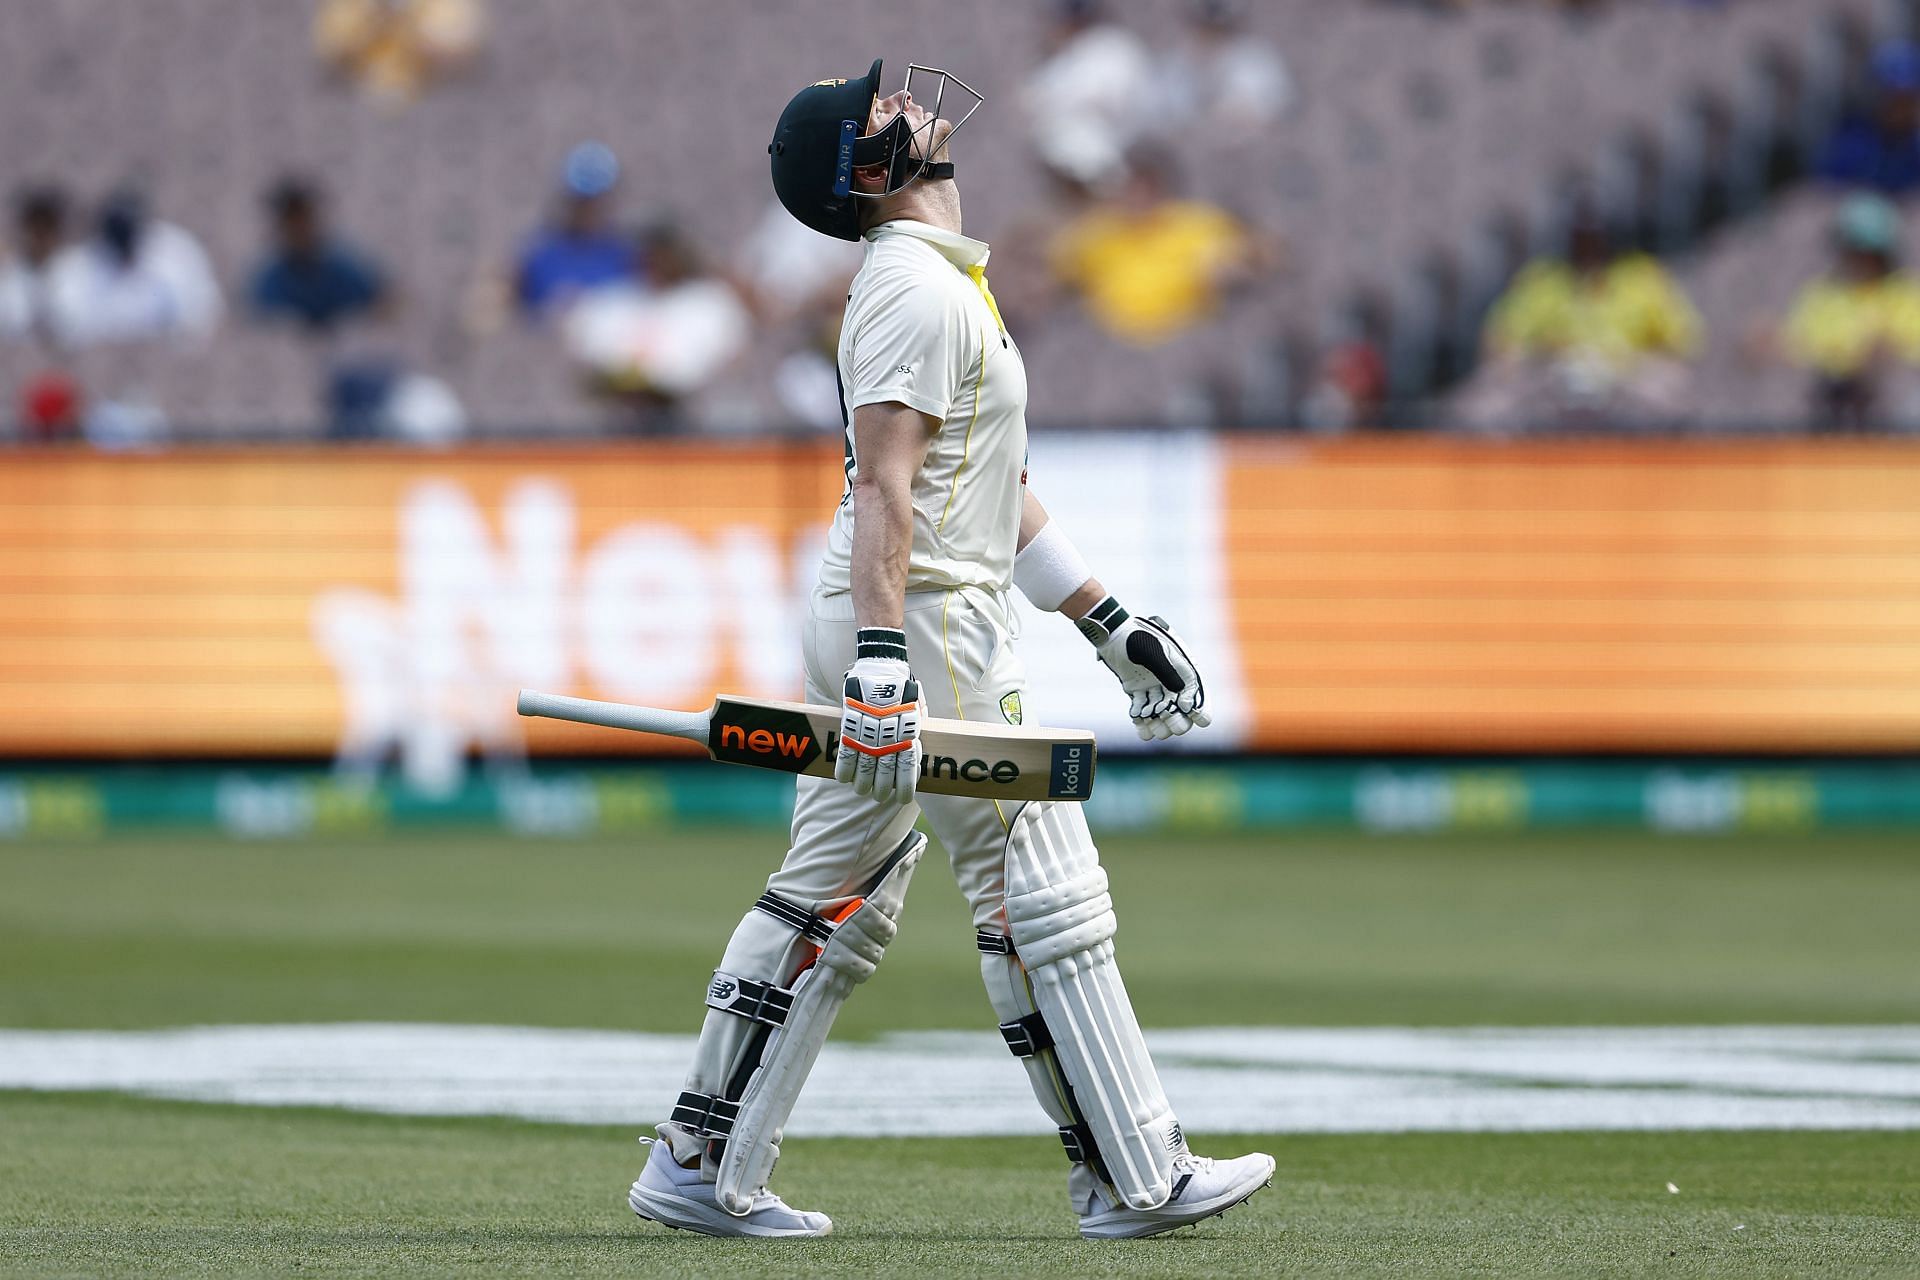 Steve Smith was disappointed after missing out on a hundred. (Credits: Getty)